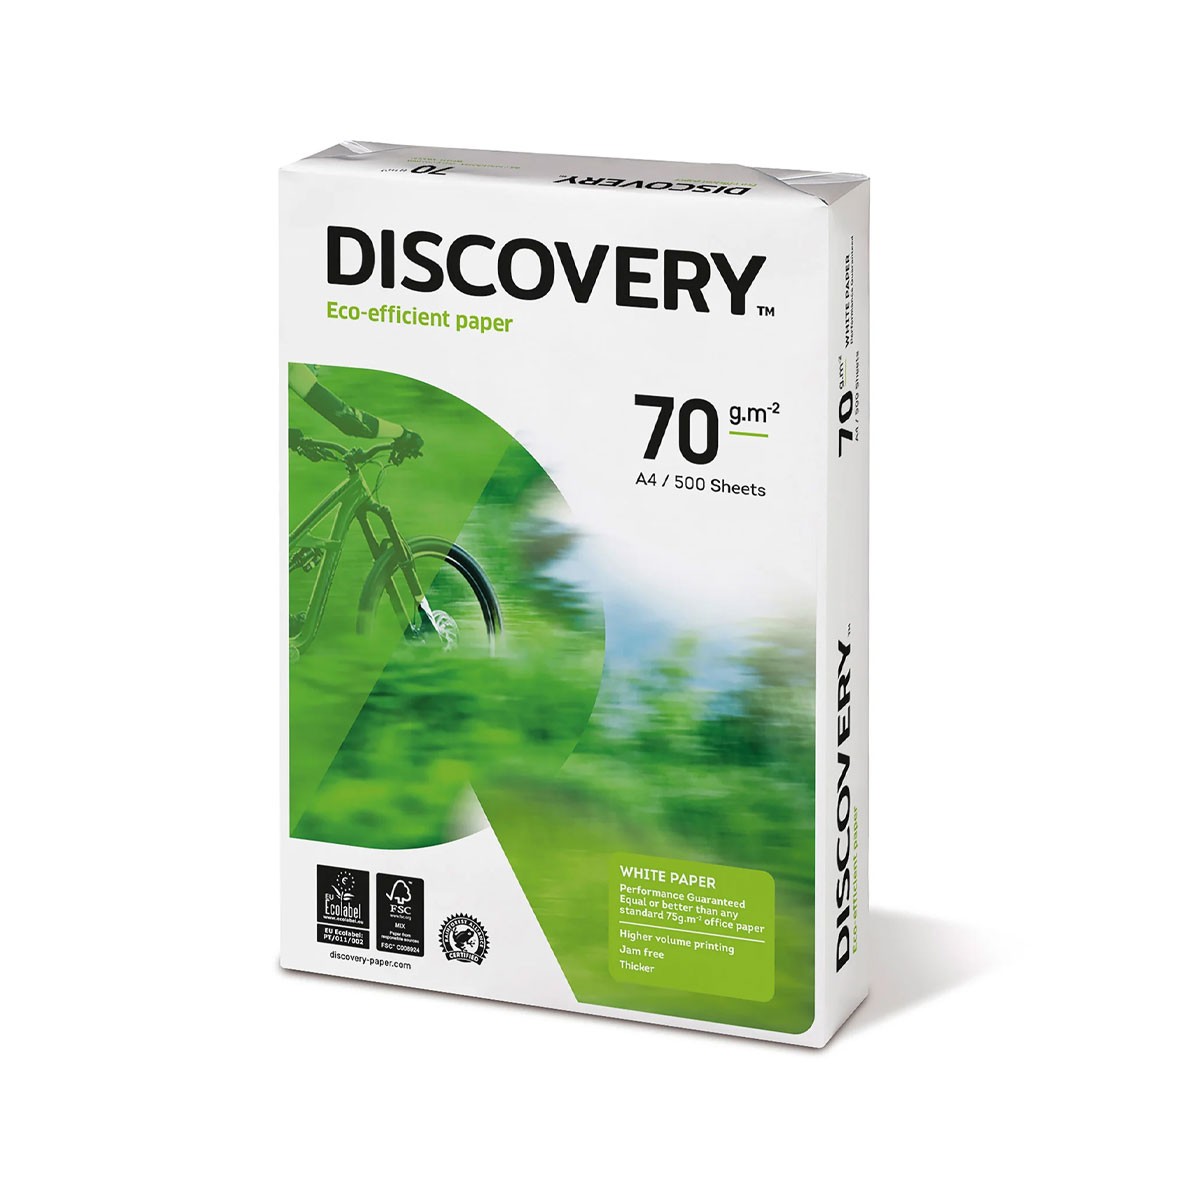 Ream Copy Paper Discovery Eco-Efficient Paper 70gr m2 A4